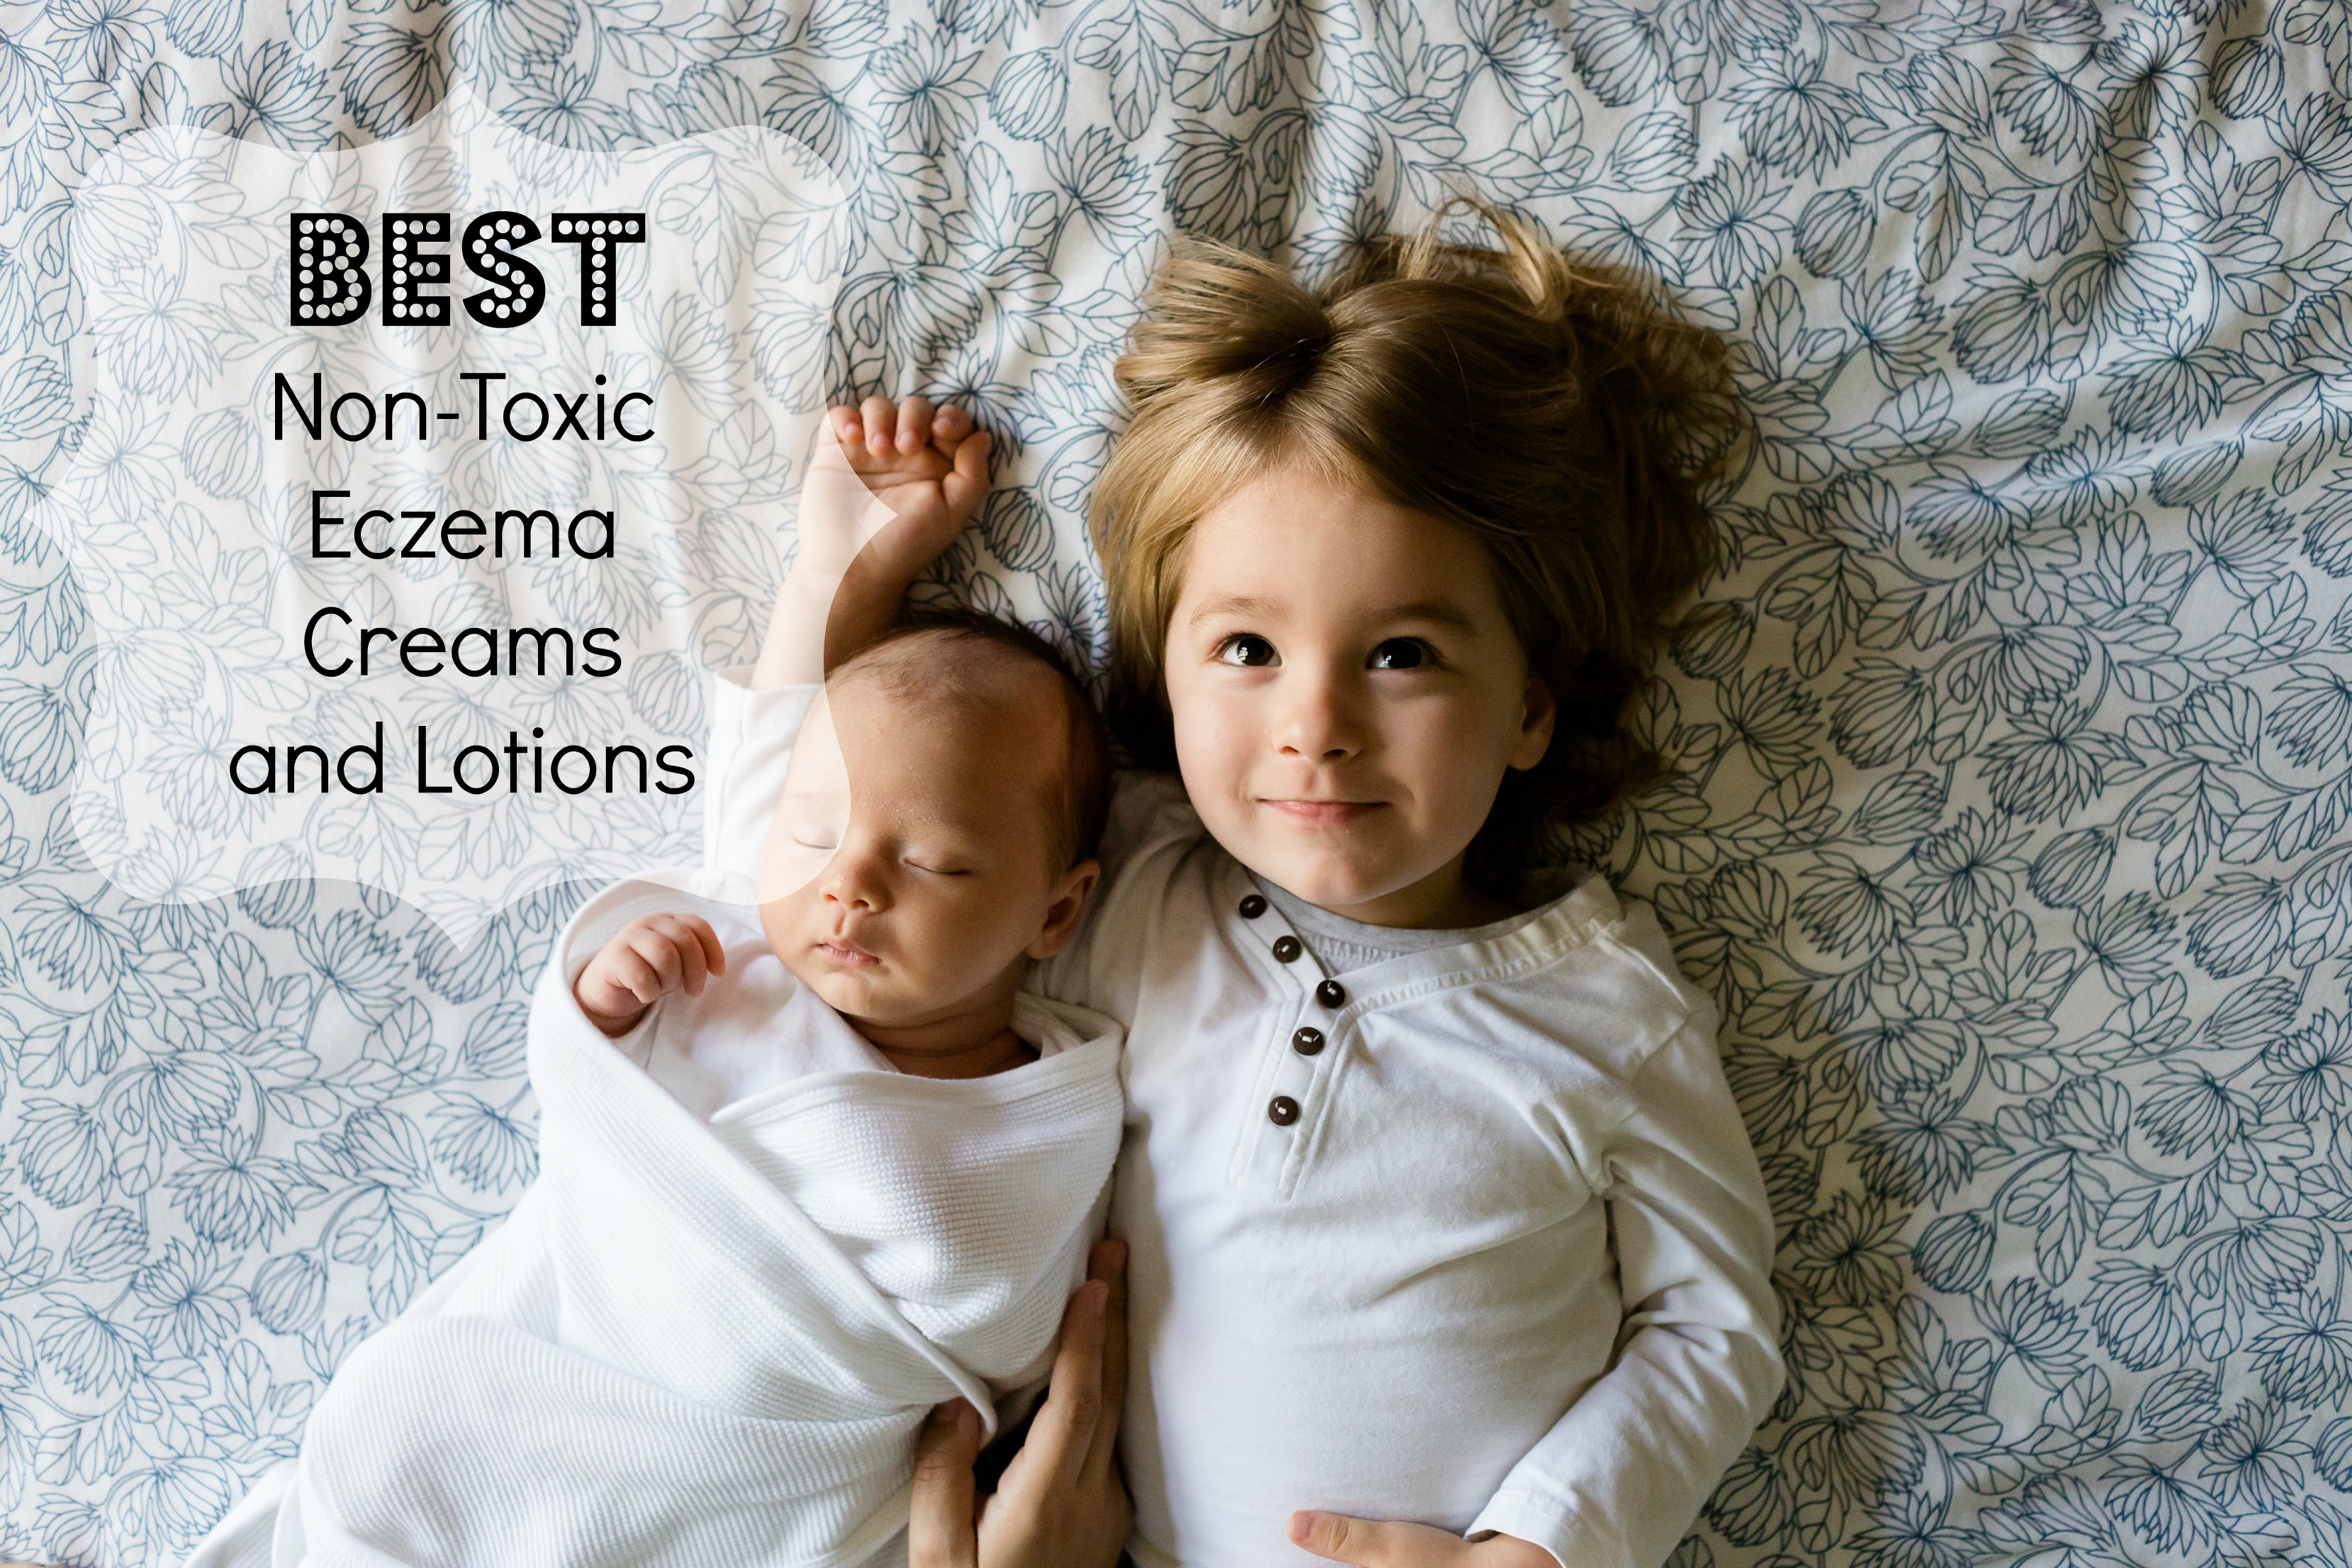 Best Non-Toxic Eczema Creams and Lotions